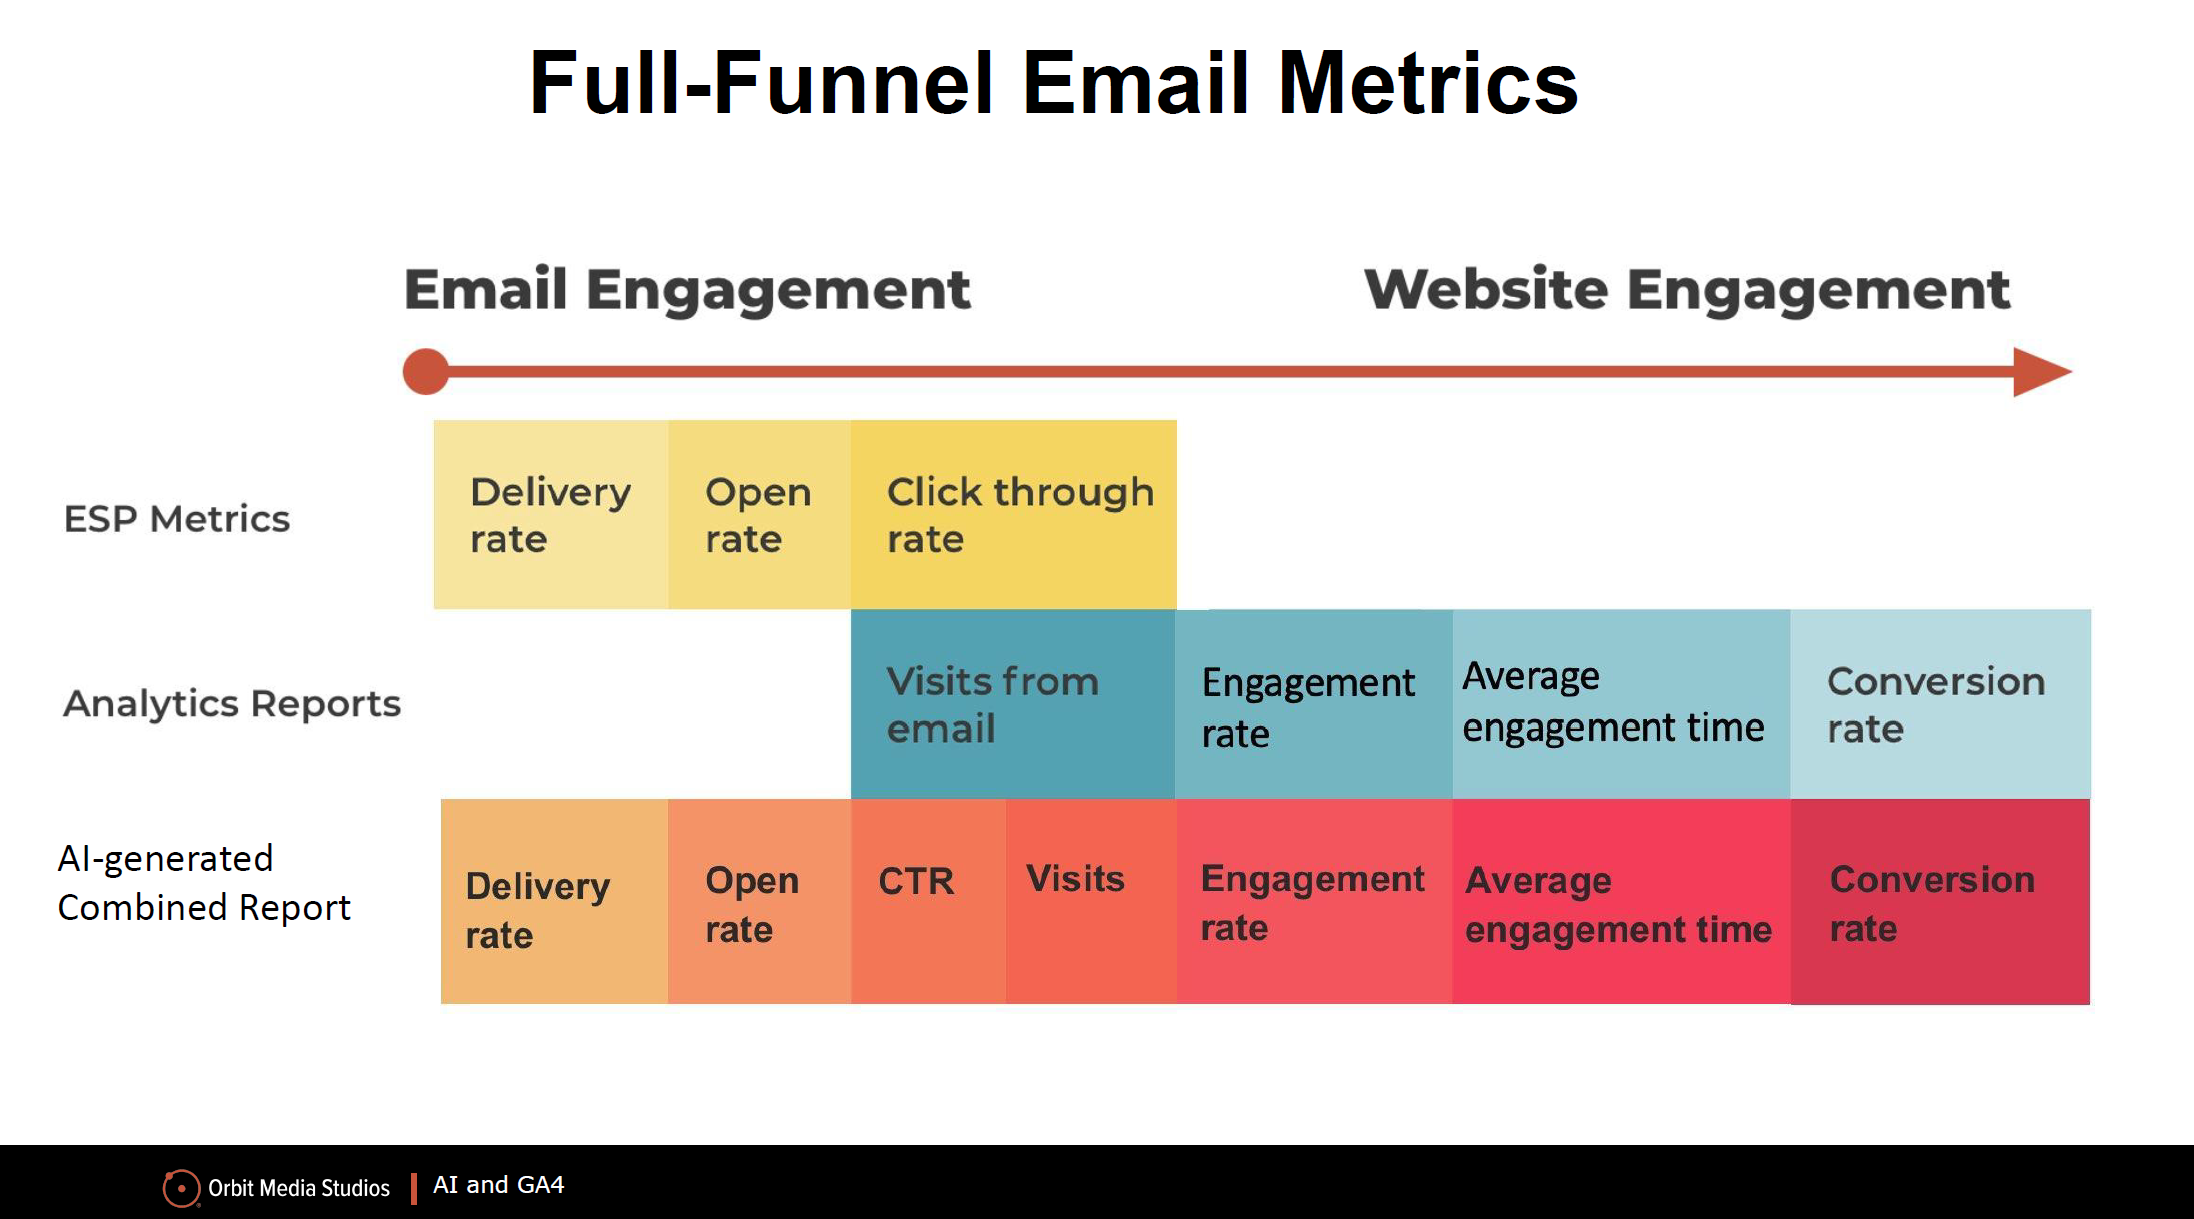 Chart breaking down full-funnel email metrics from email to website engagement